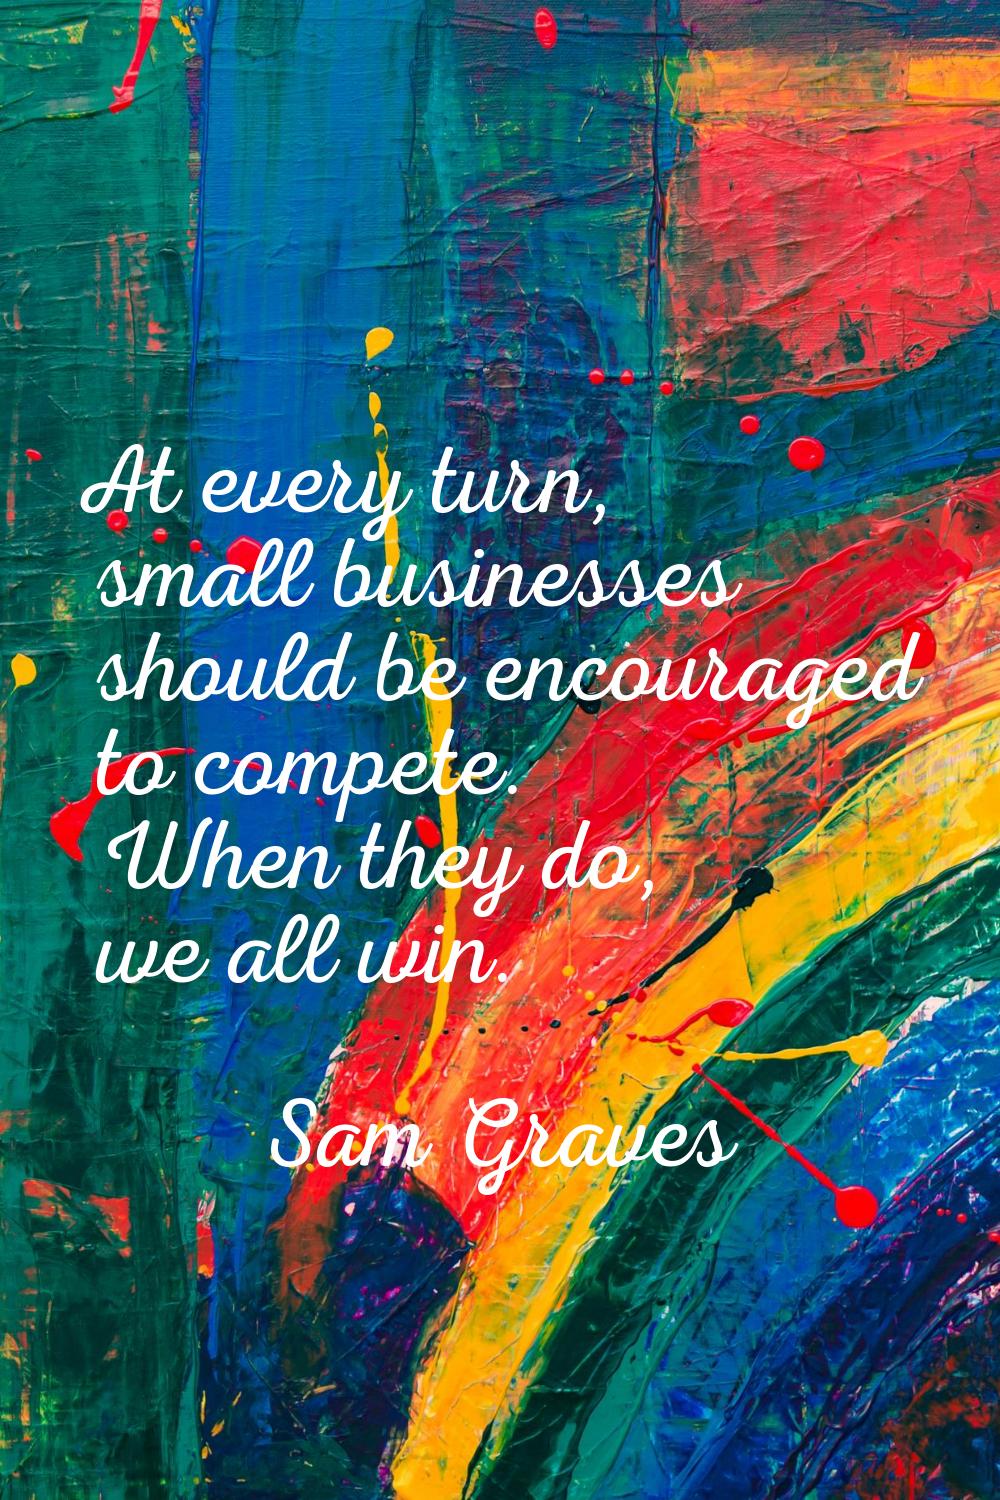 At every turn, small businesses should be encouraged to compete. When they do, we all win.